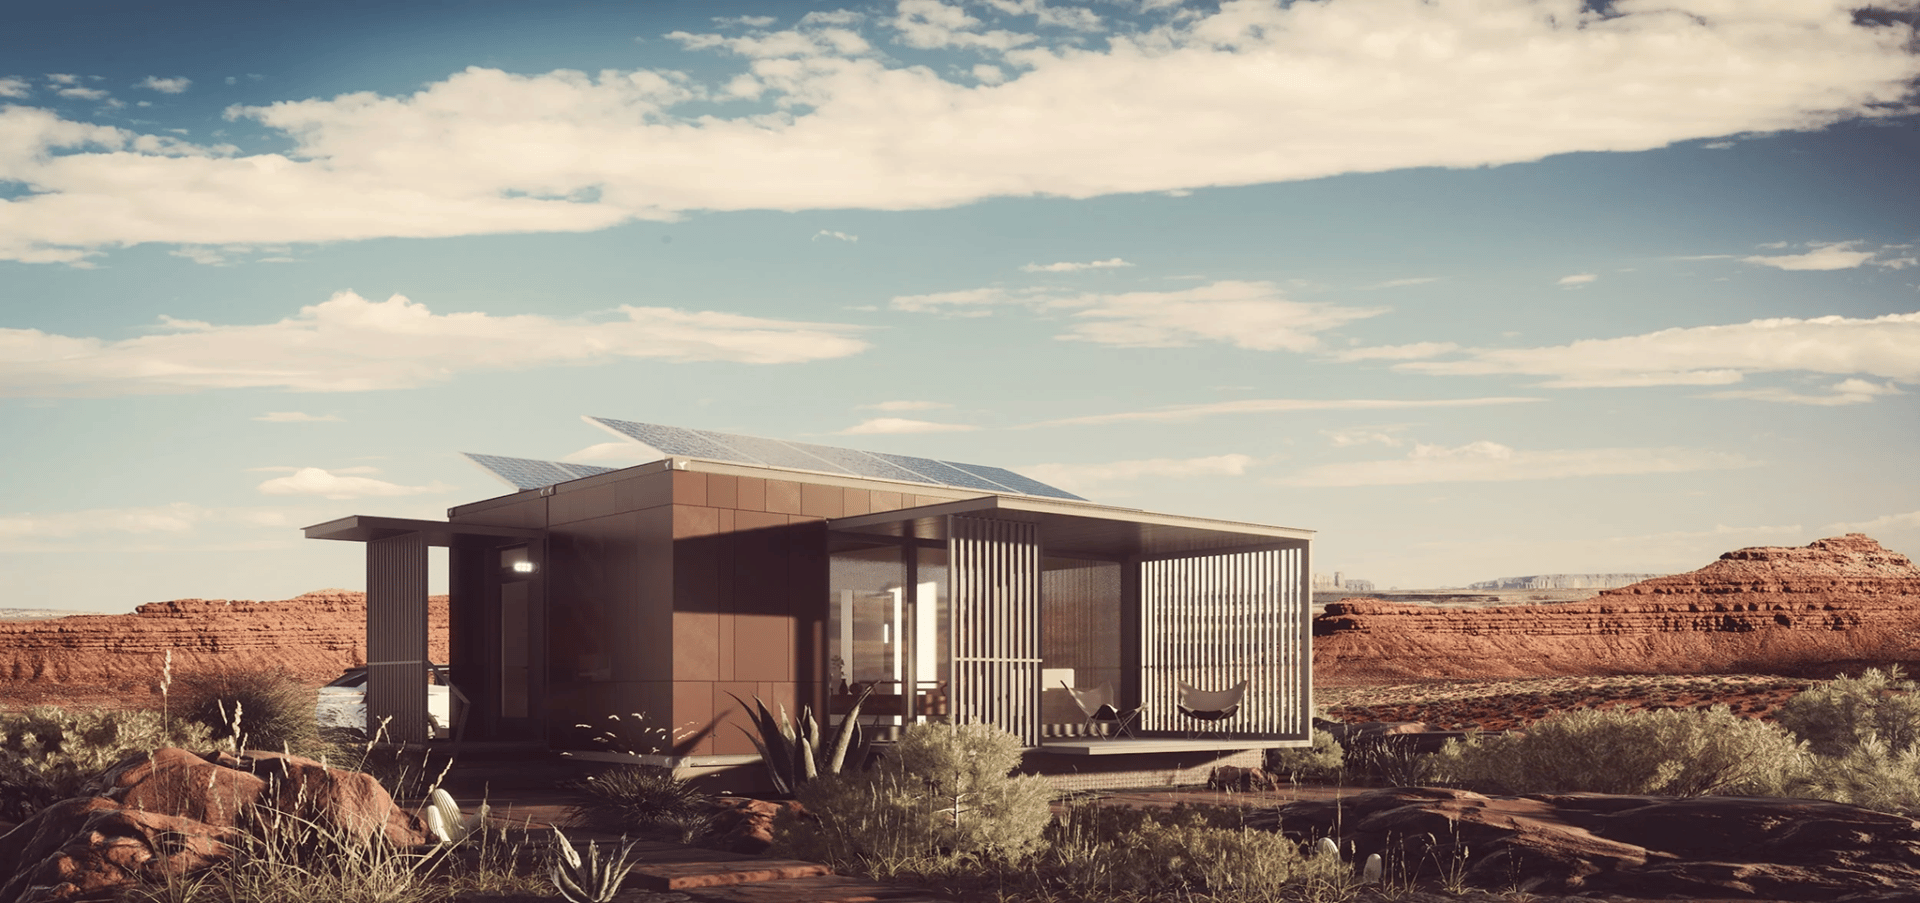 A rendered image of a Zennihome out in the desert